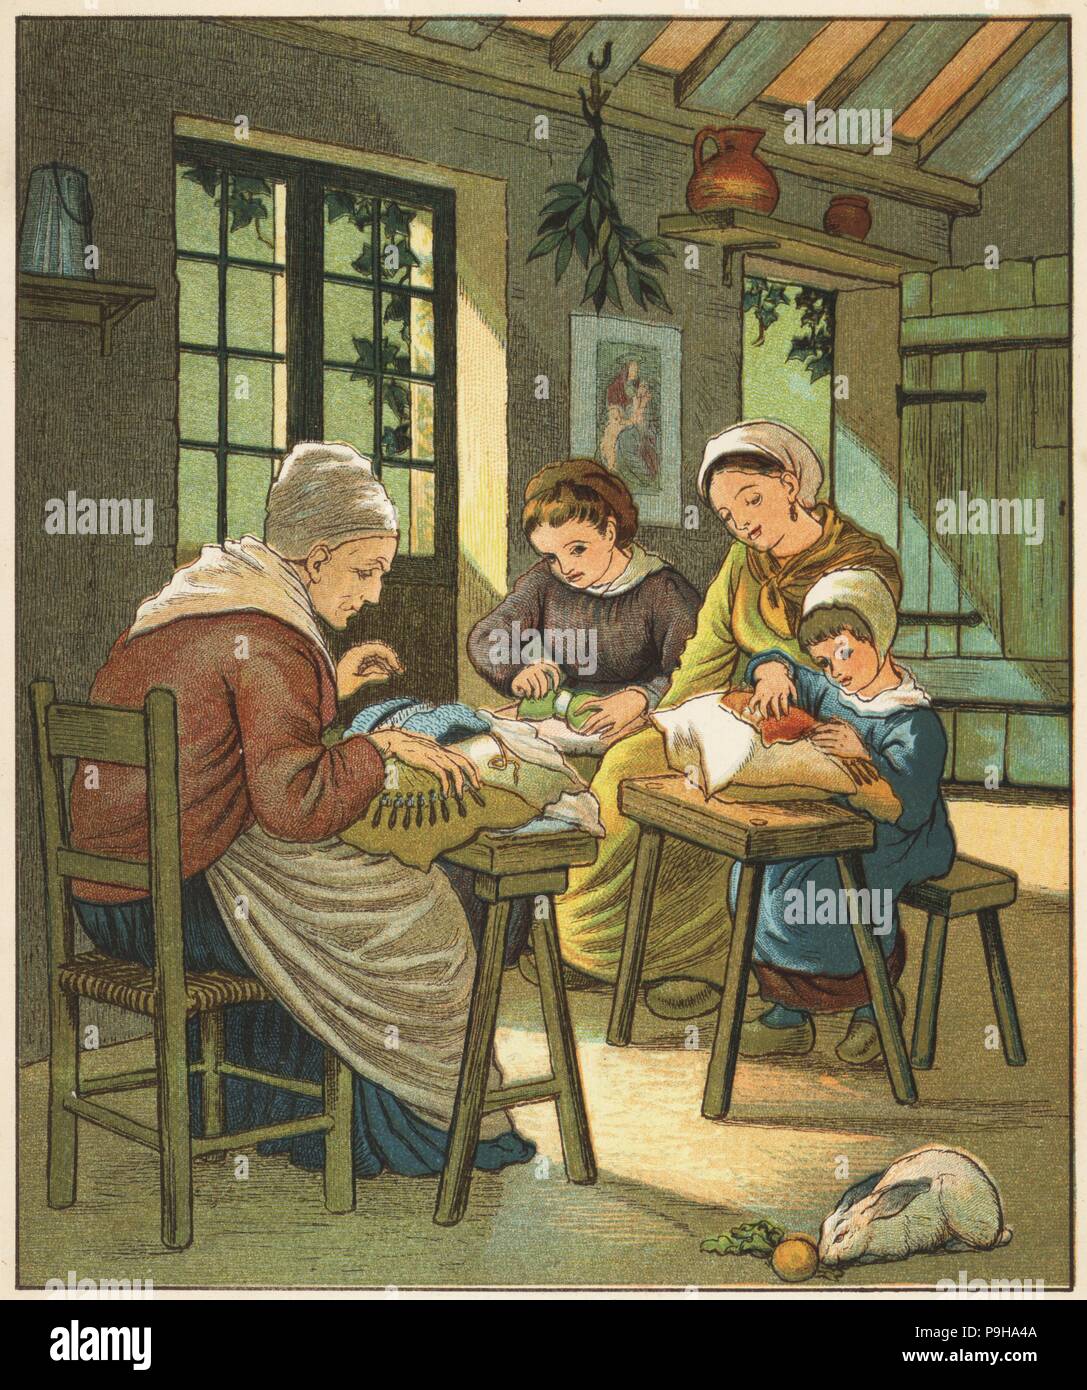 Victorian lace-makers of Caen, Normandy. Colour woodblock after an illustration by Thomas Crane and Ellen Houghton from Abroad, Marcus Ward, London, 1882. Stock Photo